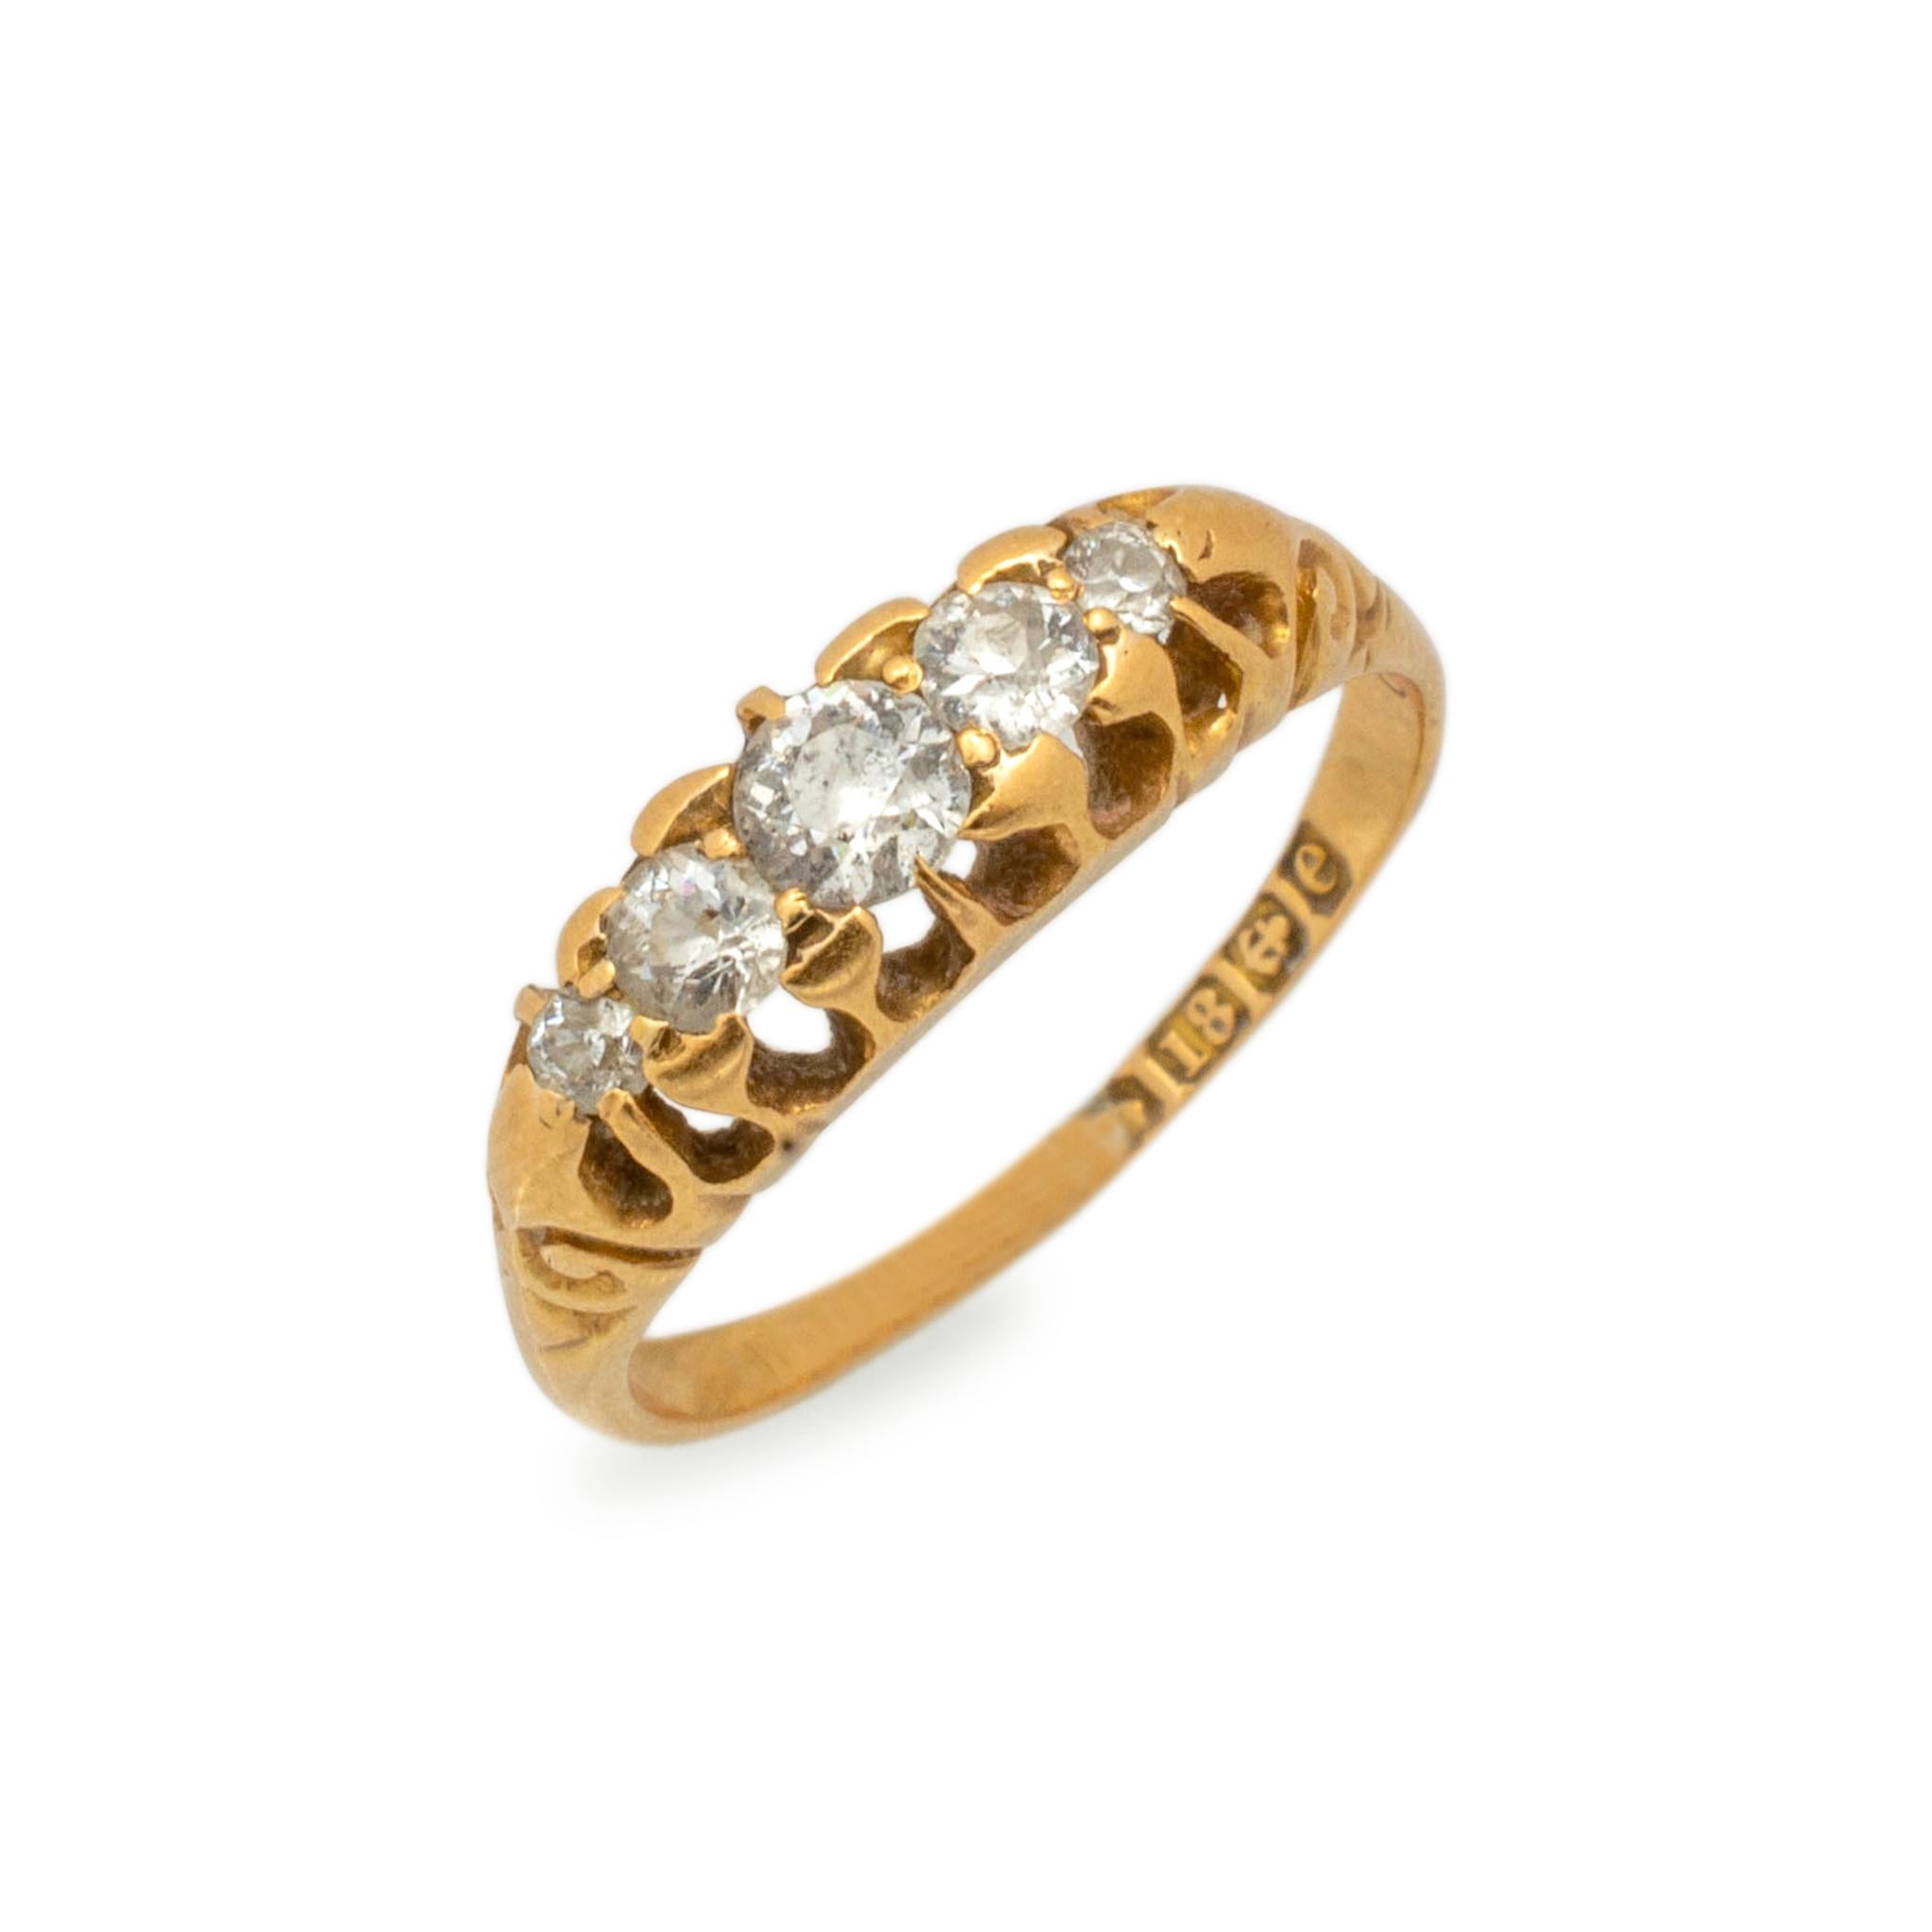 Gender: Unisex

Metal Type: 18K Yellow Gold

Size: 6

Shank Width: 5.10mm tapering to 1.35mm

Weight: 2.87 grams

Unisex satin finished 18K yellow gold five-across diamond cocktail ring with a half round shank.

Pre-owned in excellent condition.